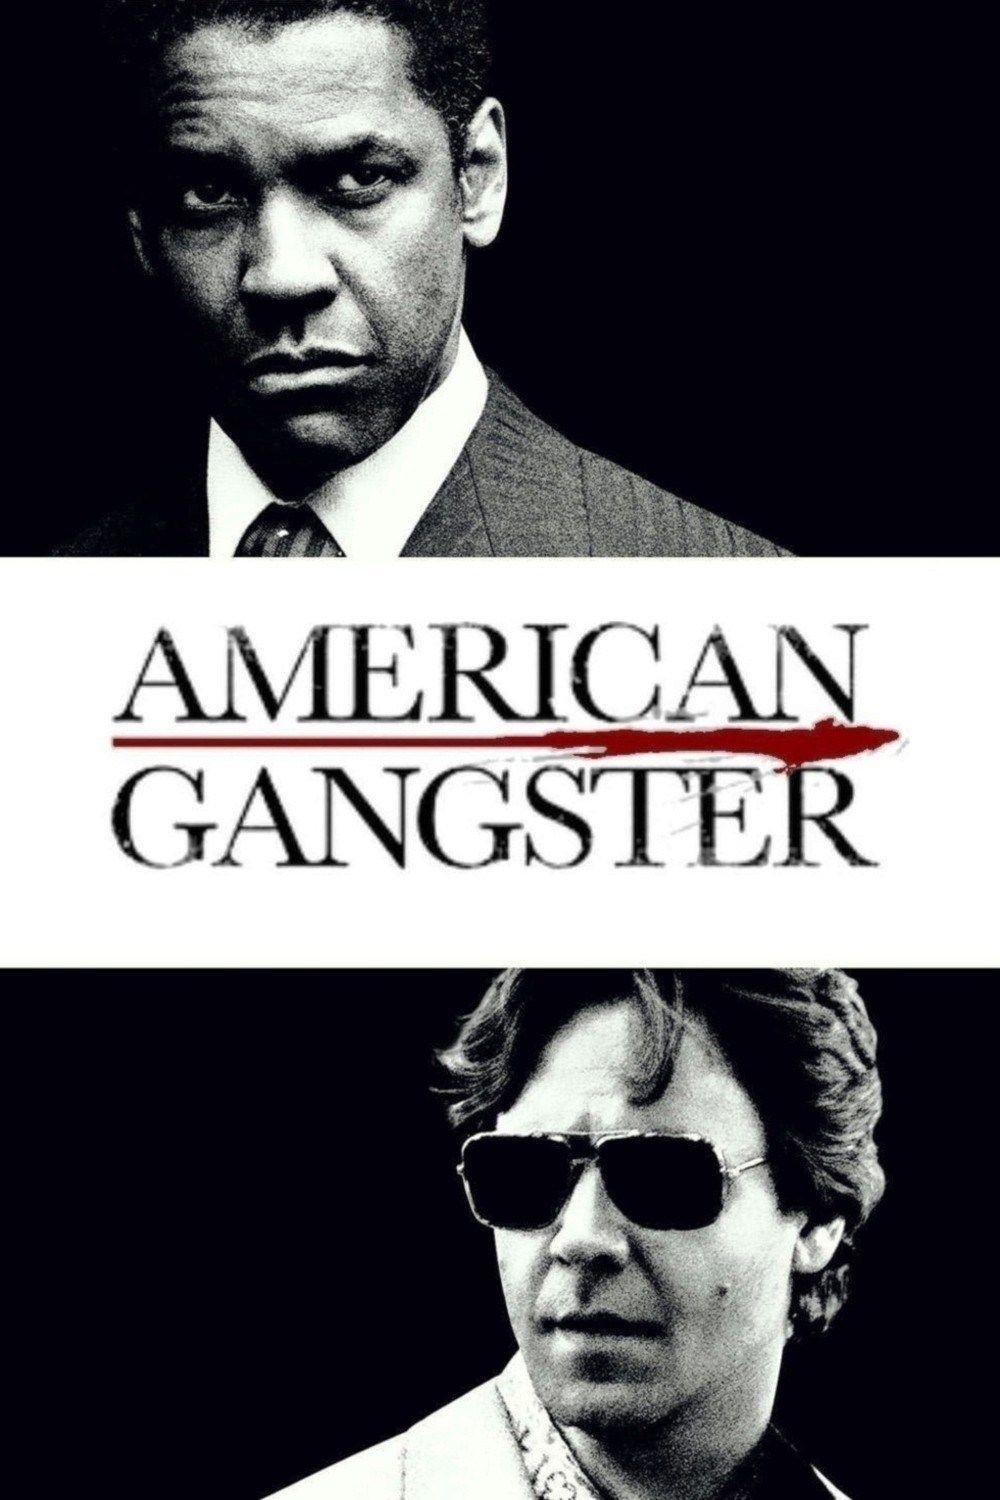 High Quality American Gangster Wallpaper. Full HD Picture